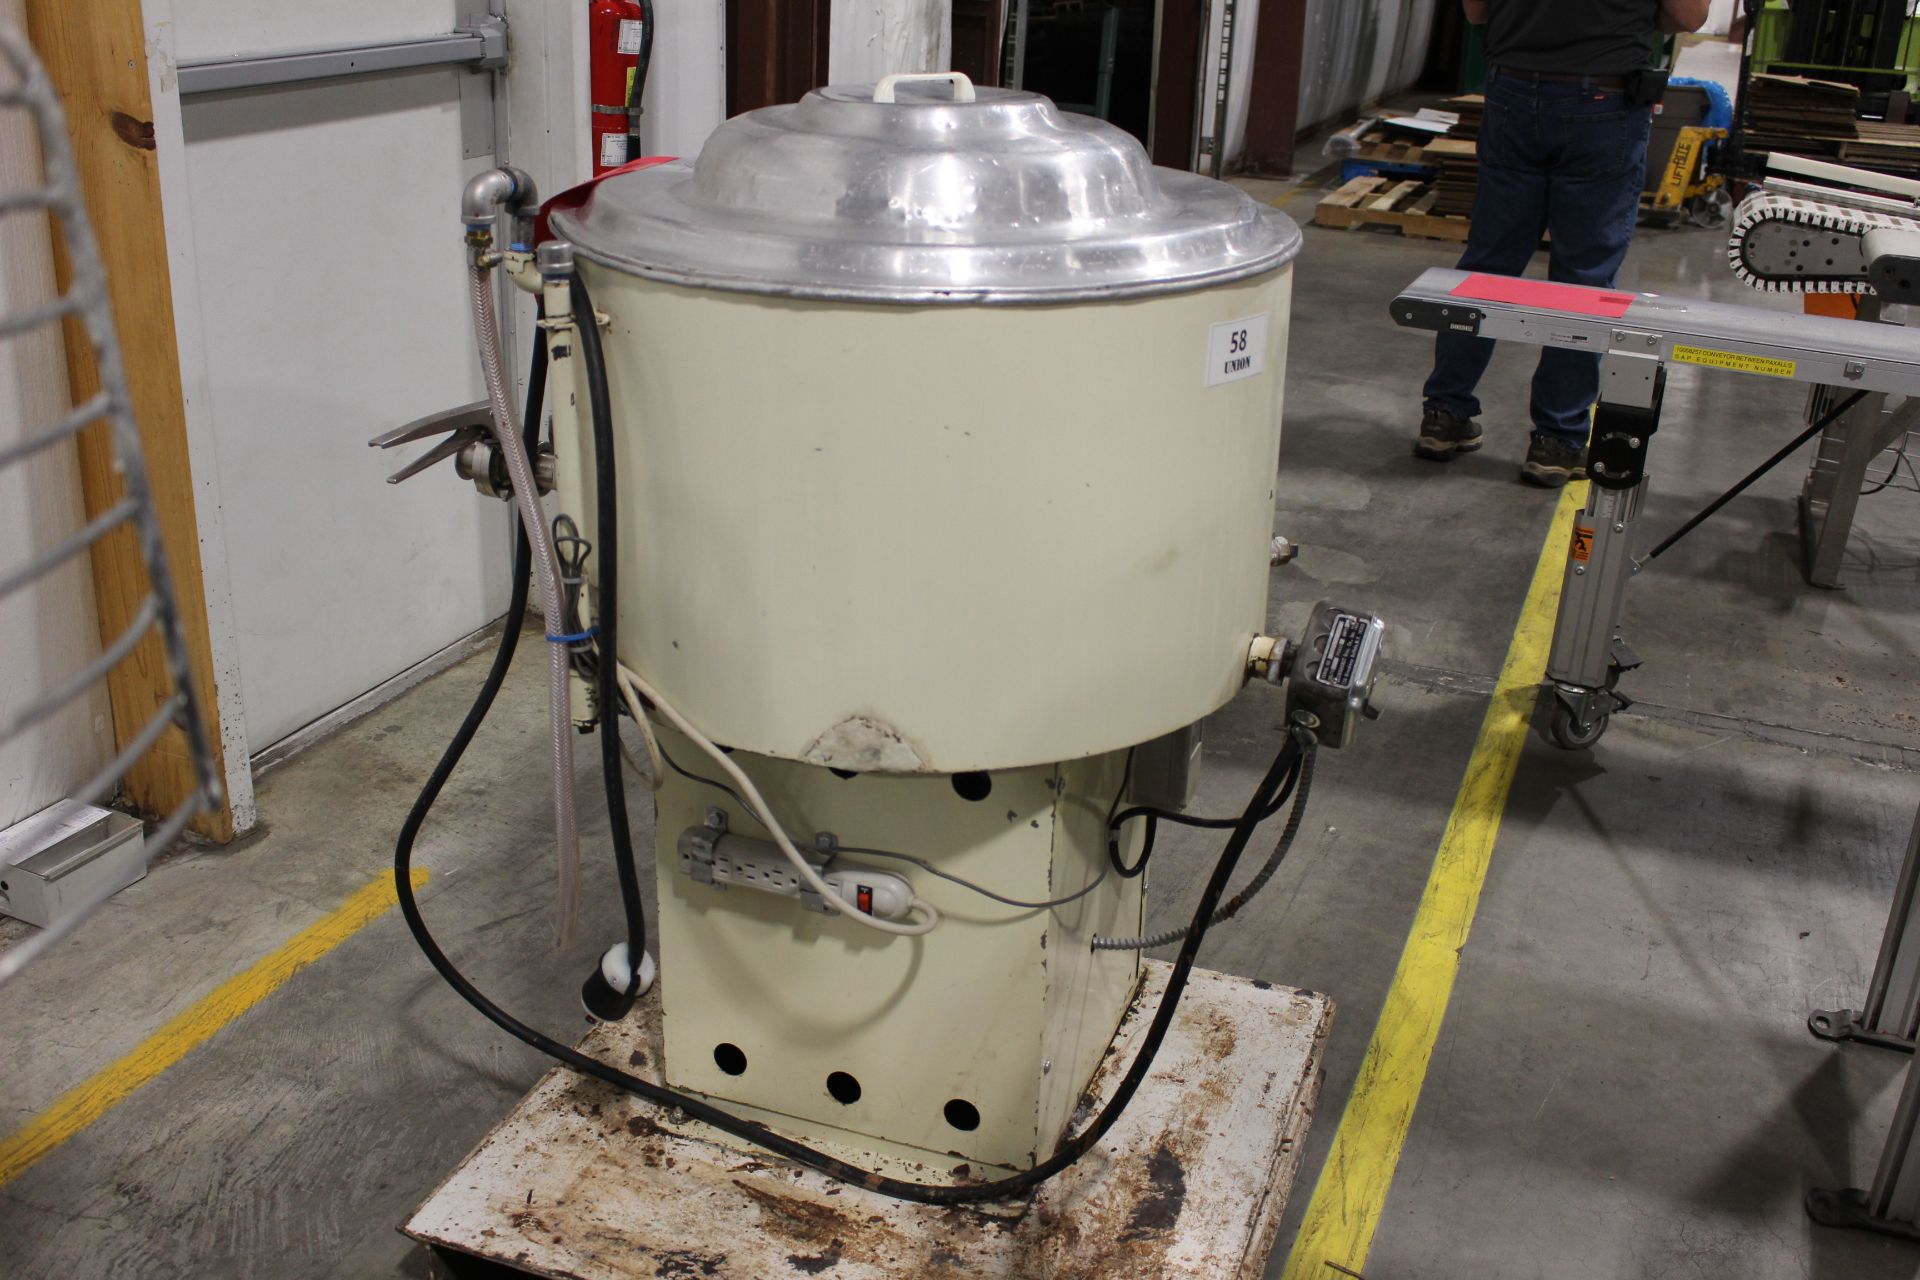 Asset 58 - Elsinghorst 200-lb Carbon Steel water jacketed and agitated Chocolate Melter,